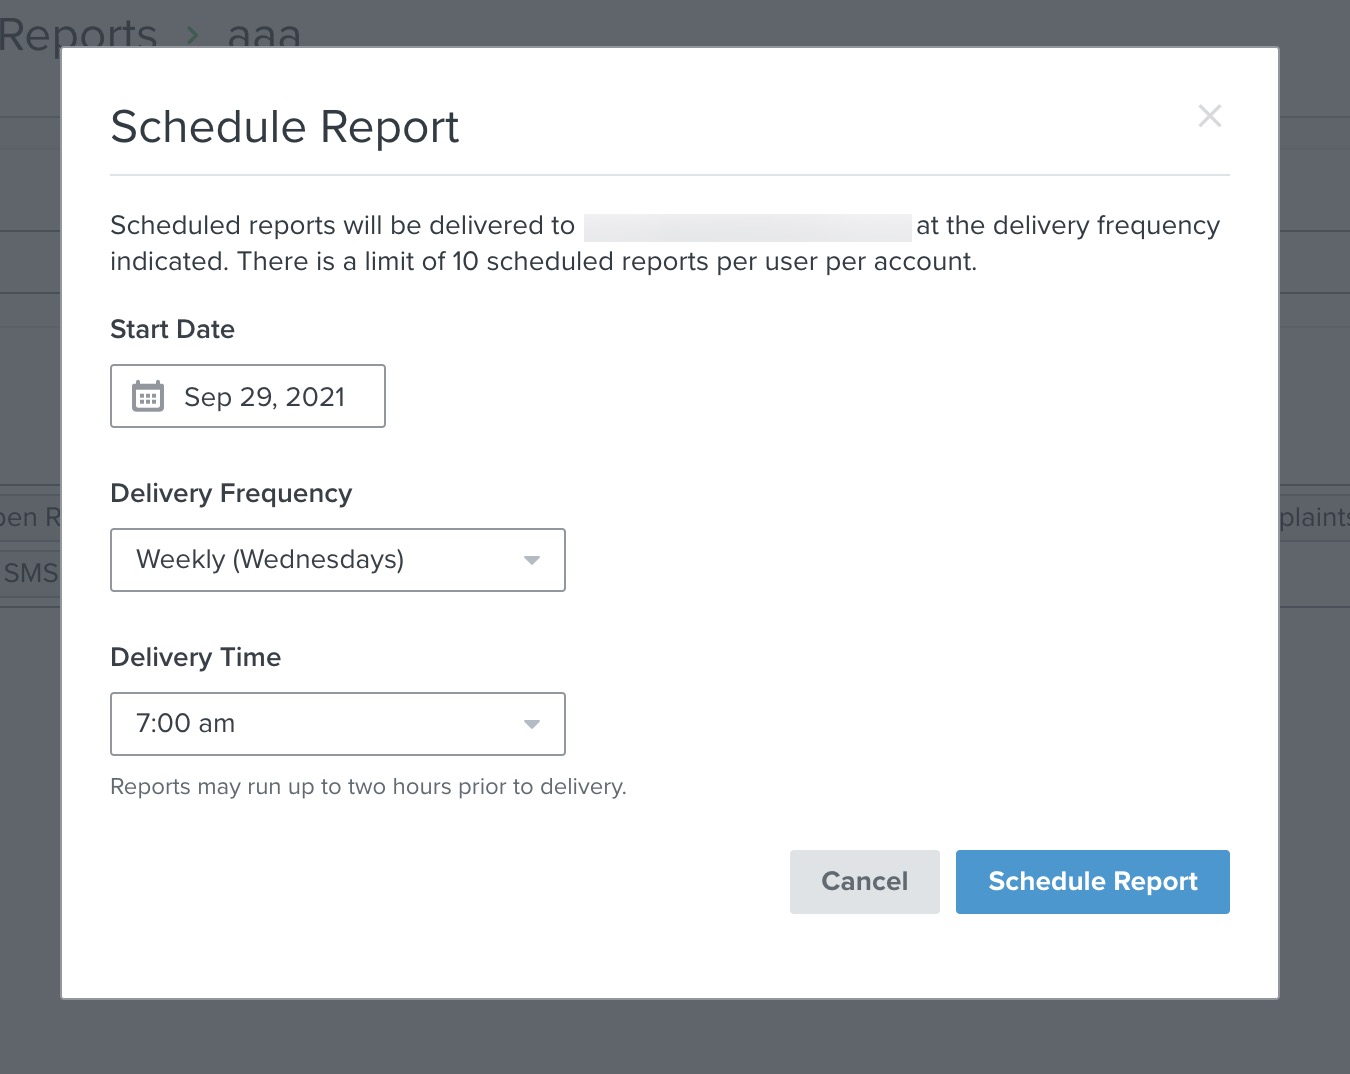 View of the Schedule Reports wizard in Klaviyo in which to edit your existing scheduled report